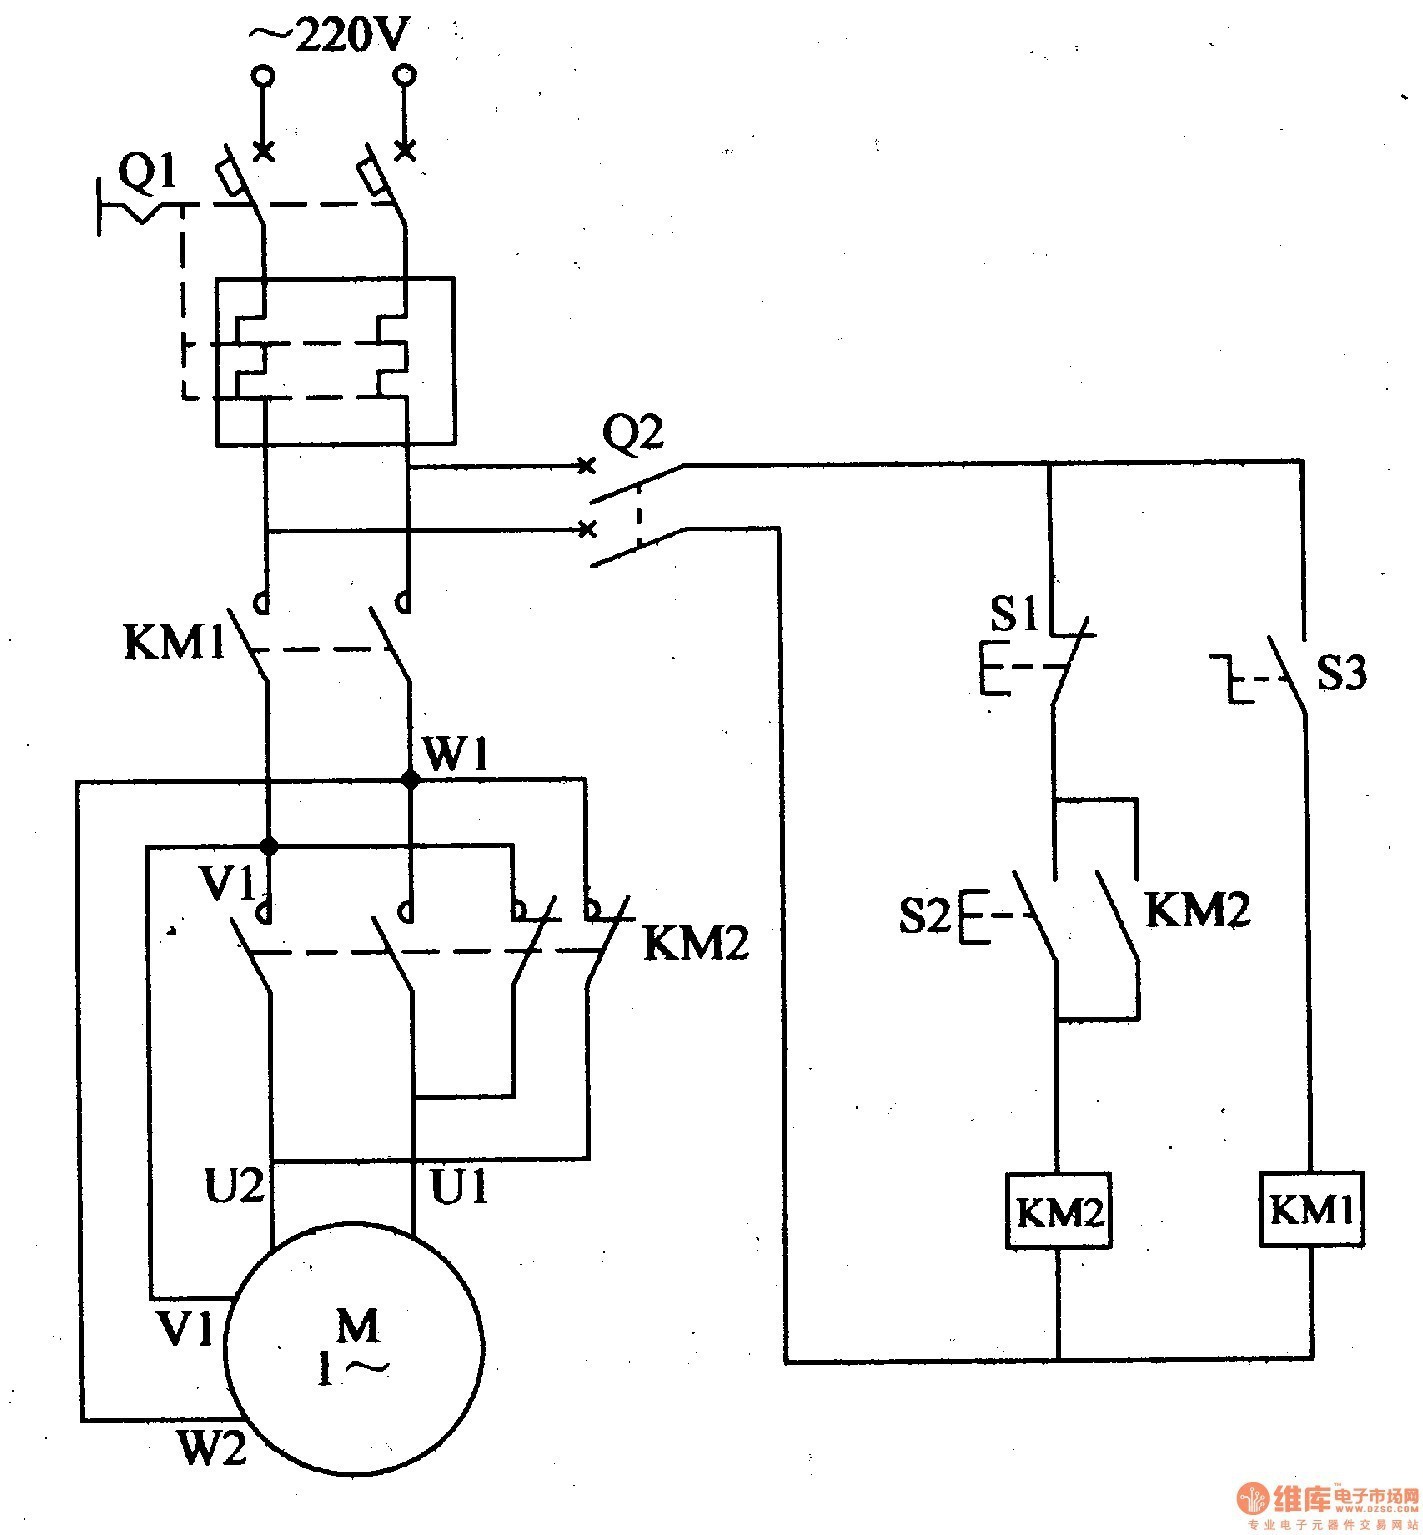 Wiring Diagram For Reversible Ac Motor New Refrence Single Phase Forward 1